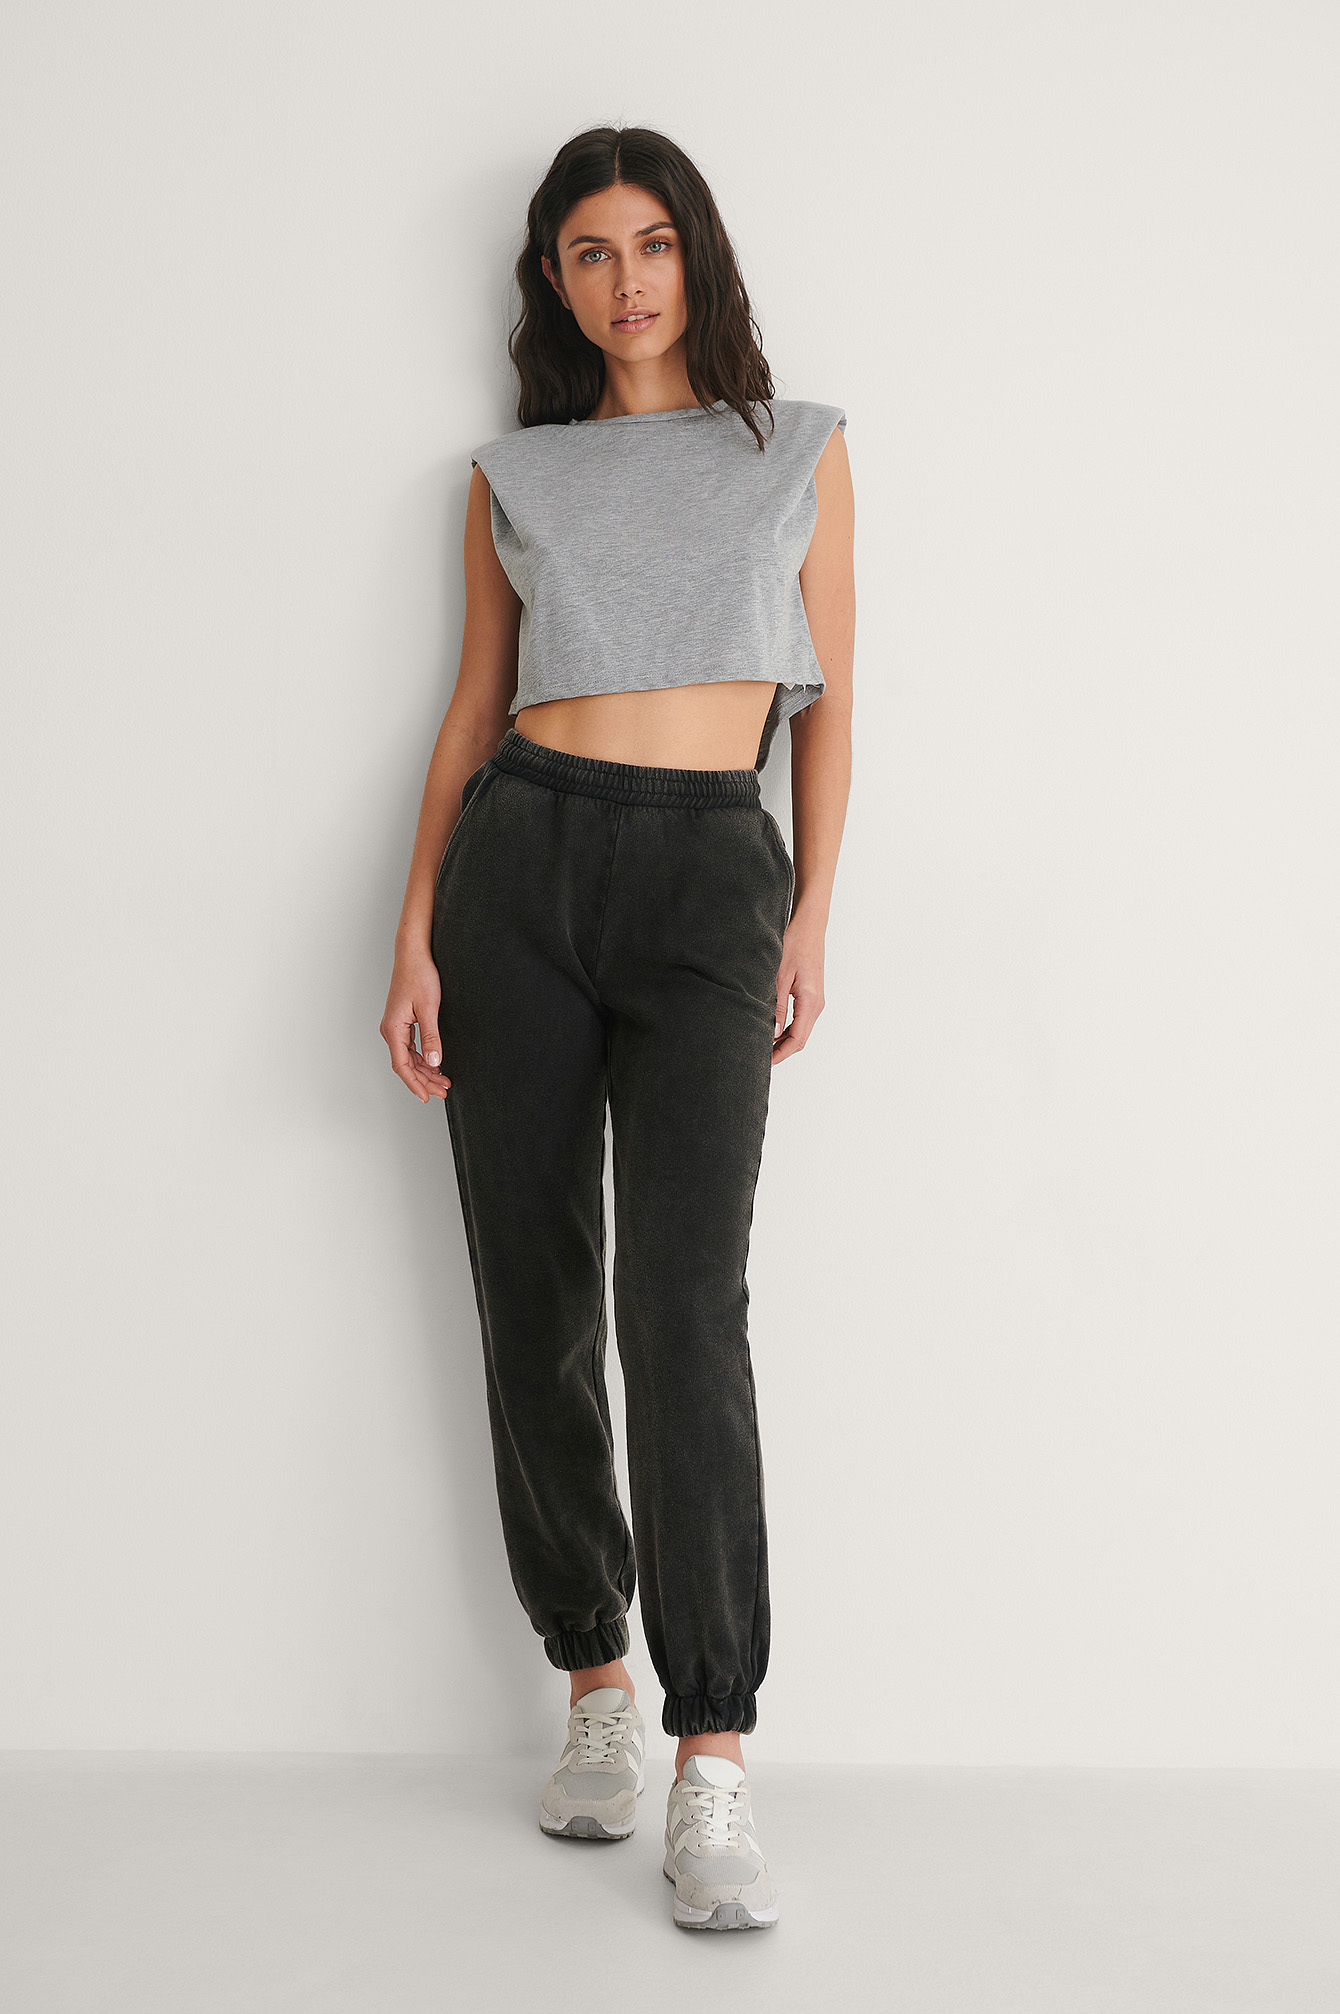 Trendyol Padded Shoulder Tee Outfit